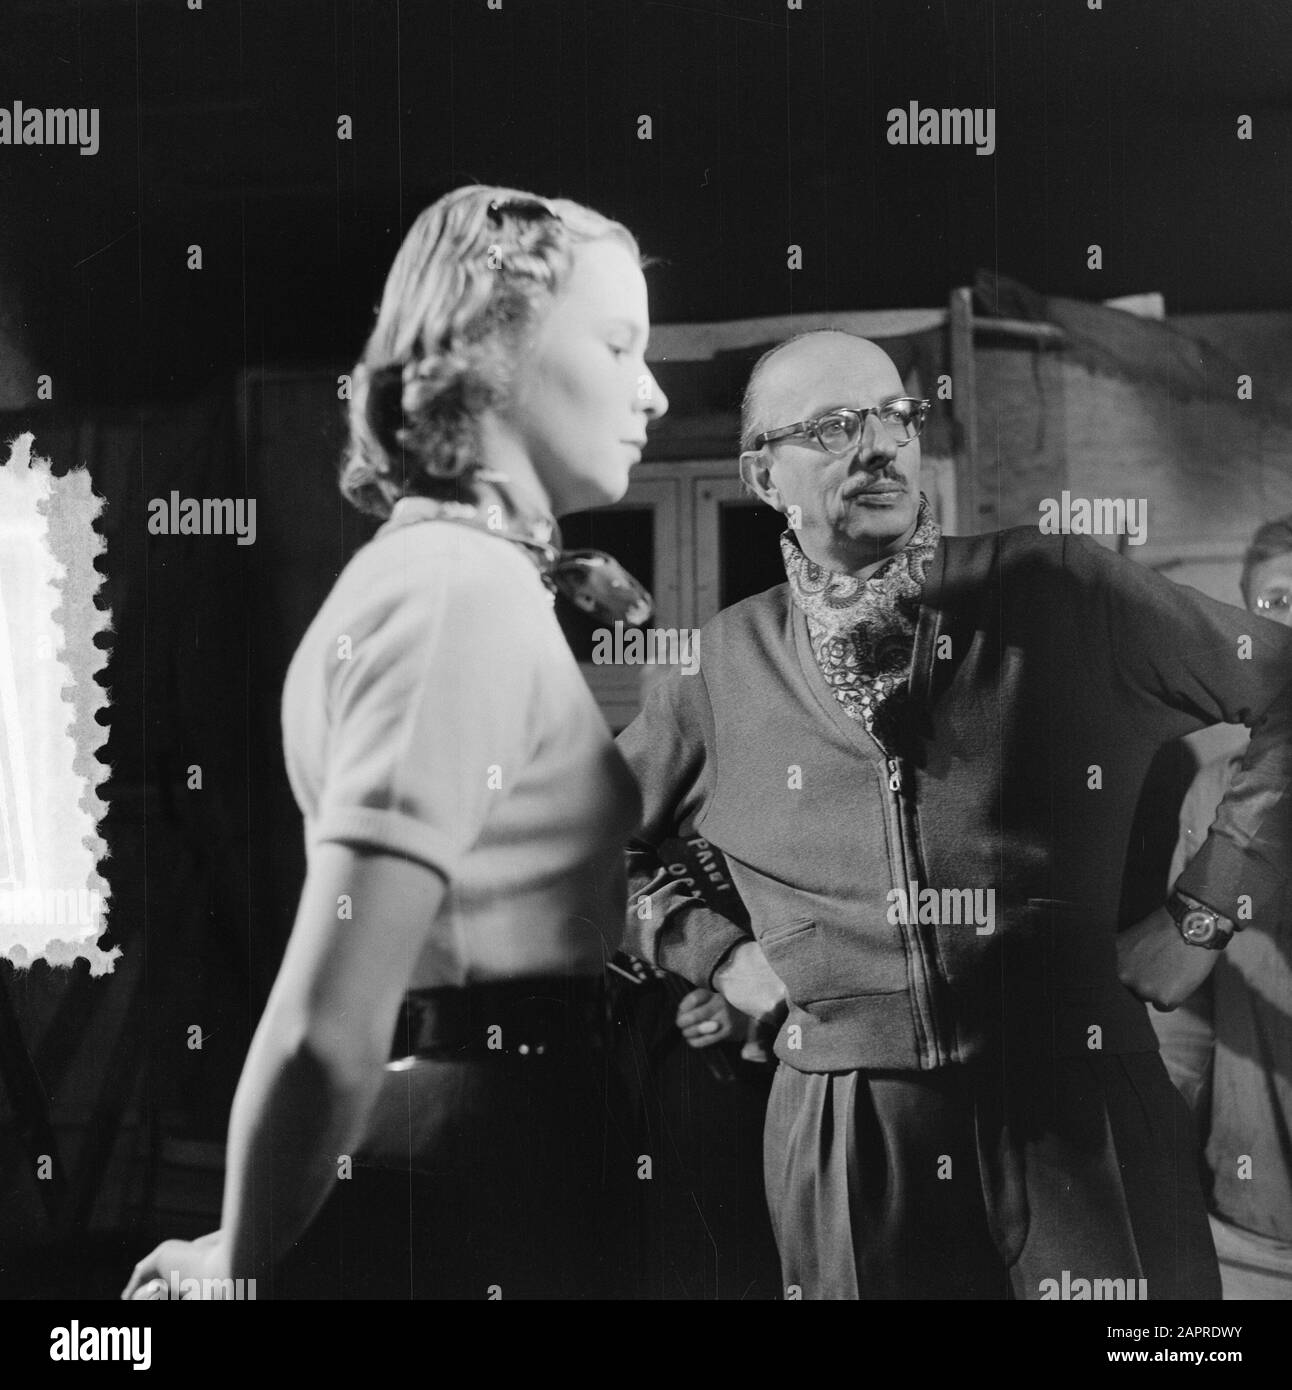 Film. Trial recordings Stars shine everywhere Annotation: Kitty Jansen and right the director Gerard Rutten. Location: Cinetone Studio Duivendrecht Date: 13 October 1952 Location: Duivendrecht Keywords: actors, film, directors, work recordings Personal name: Janssen, Kitty, Rutten, Gerard Stock Photo